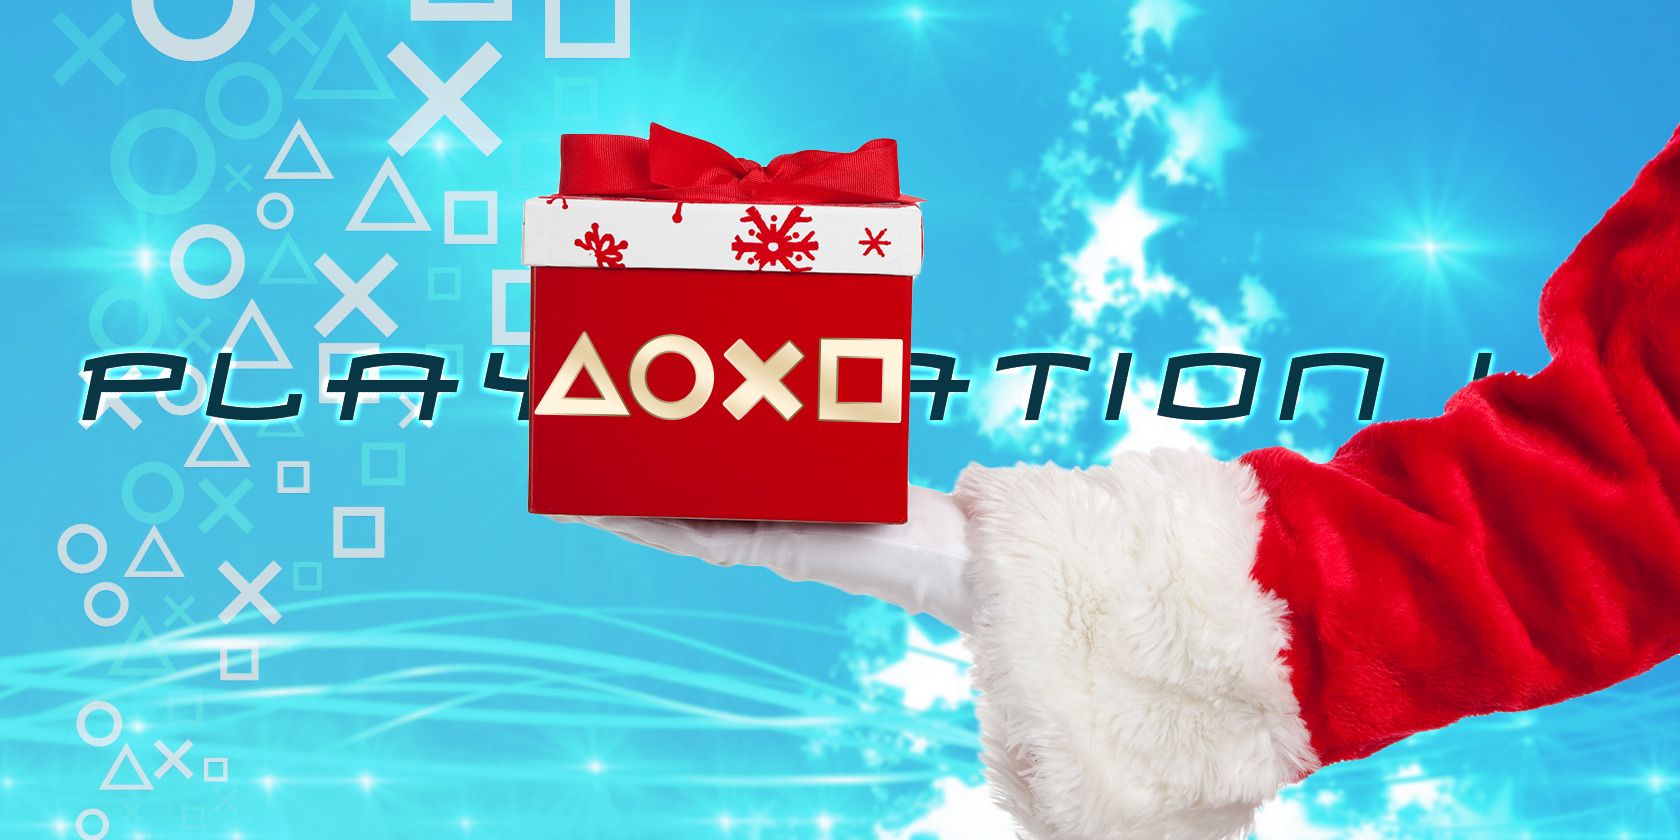 ps4-gifts